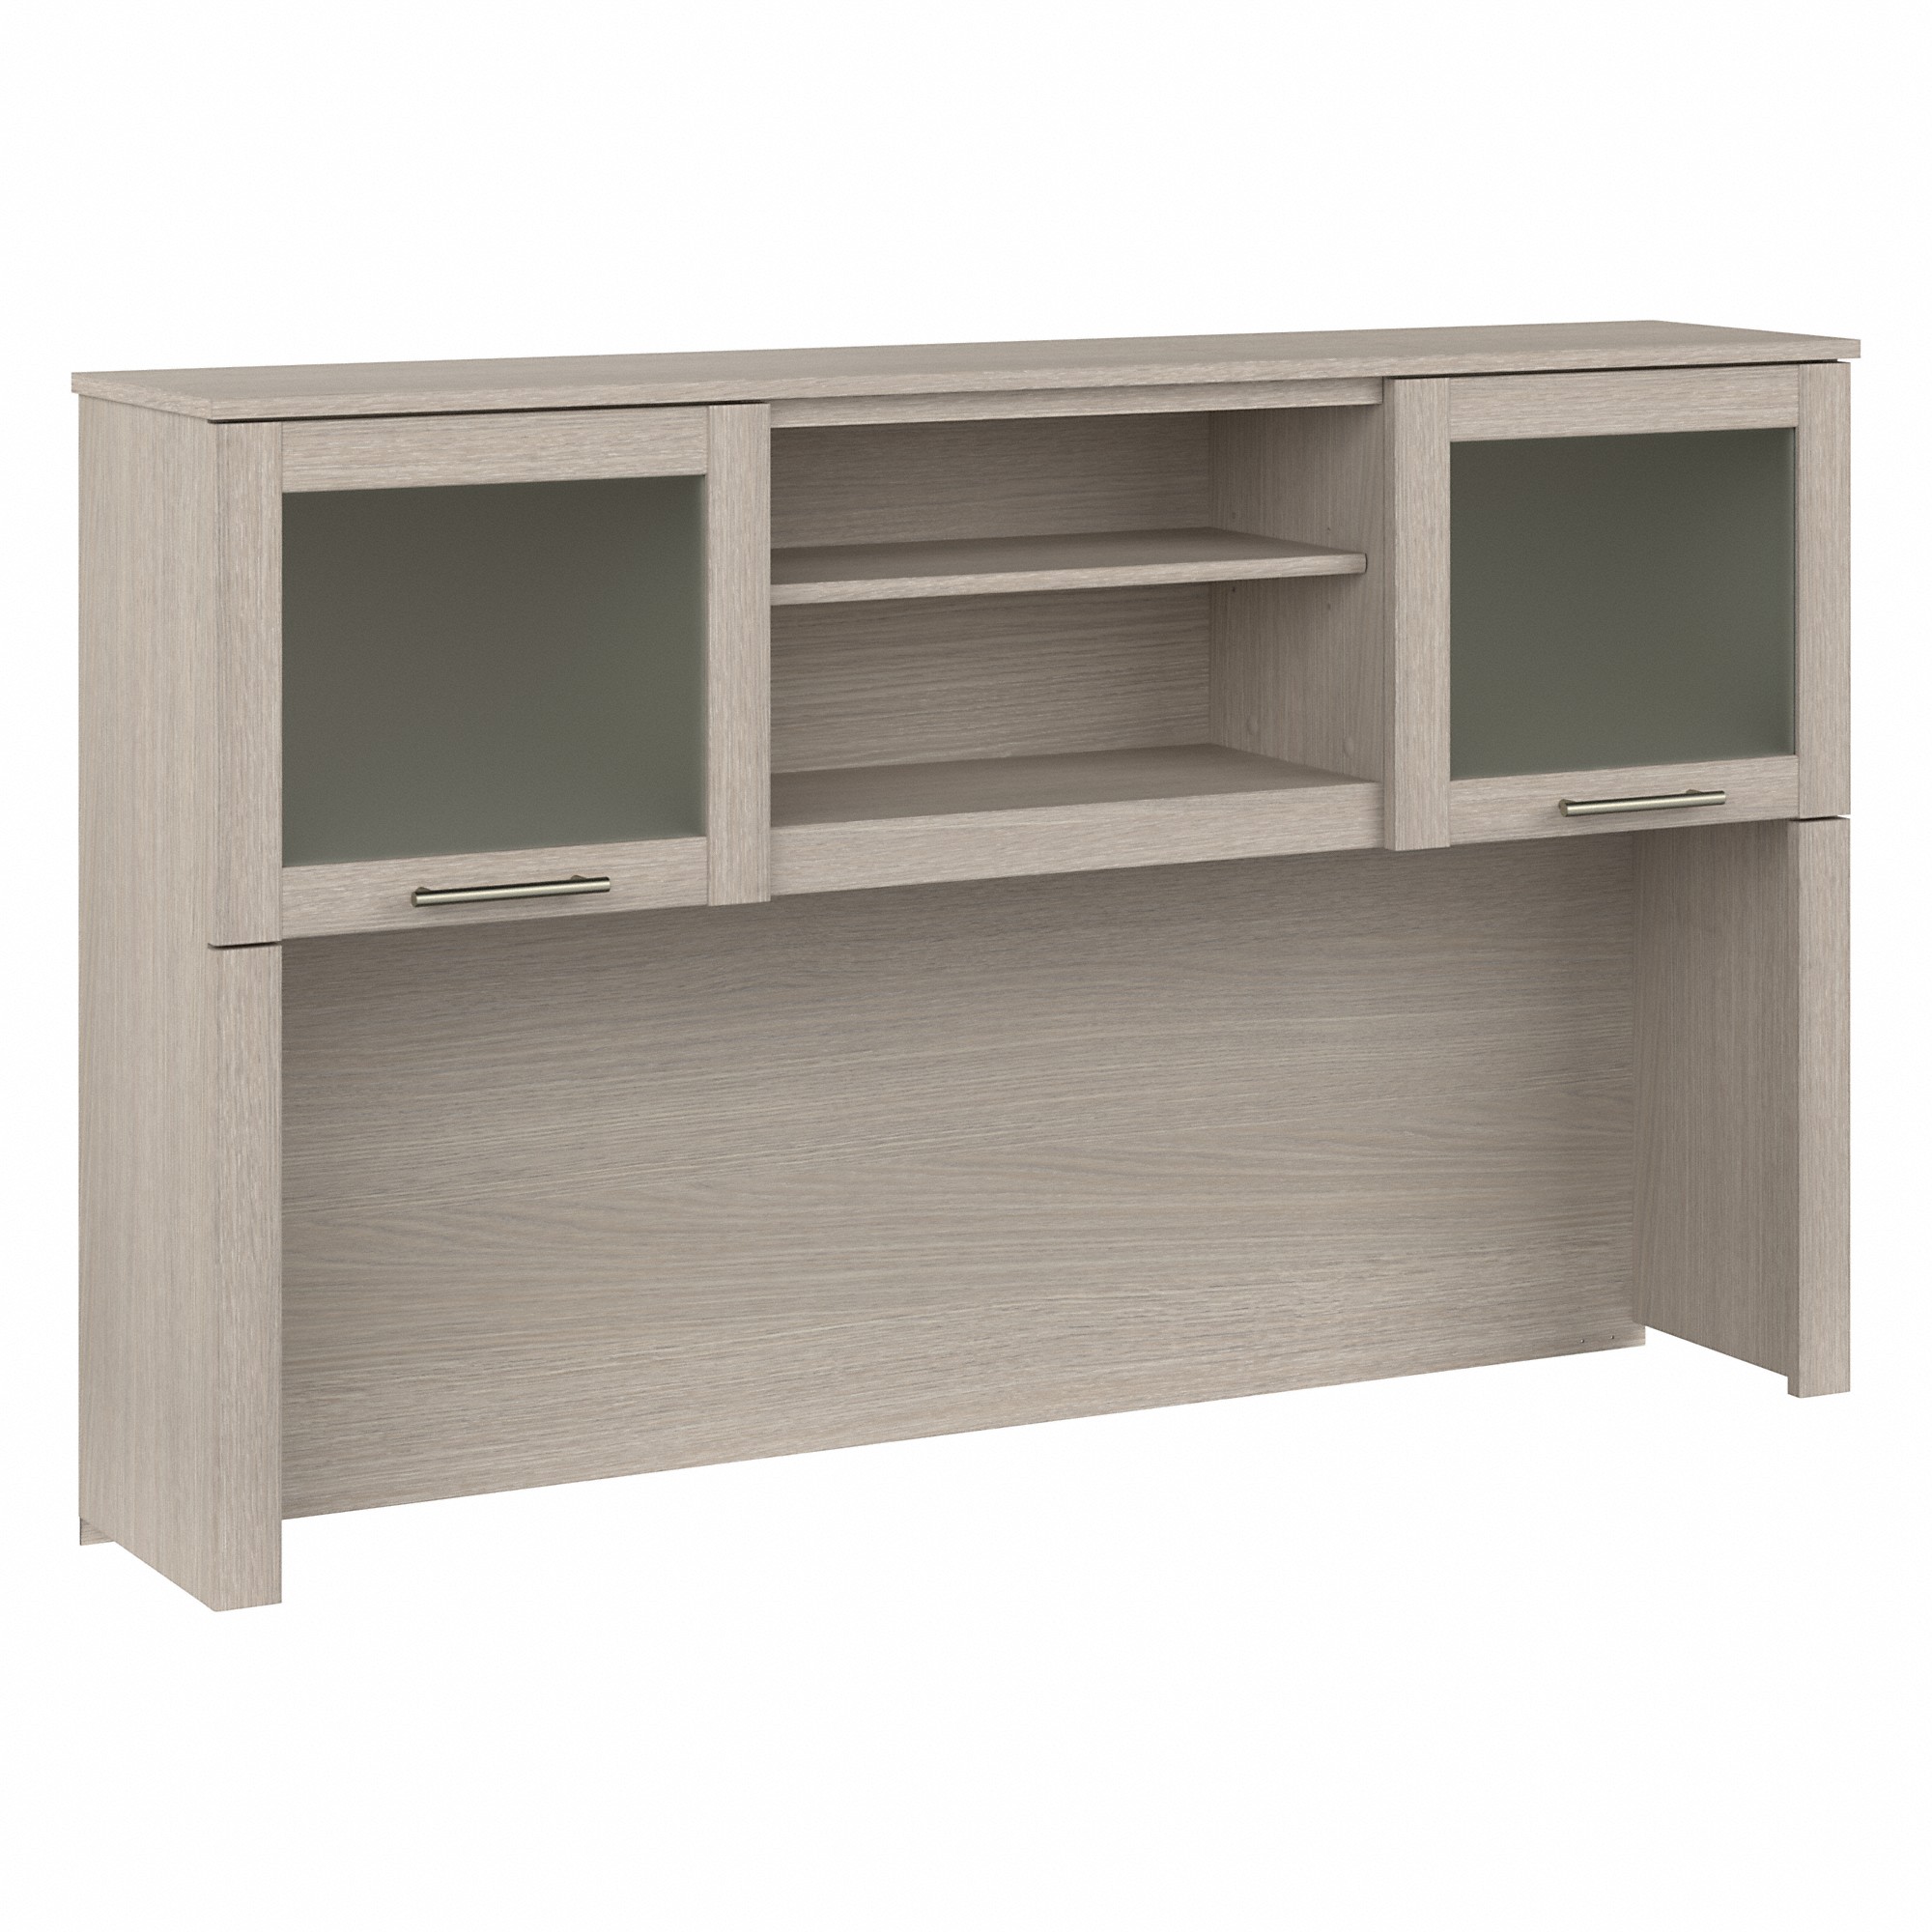 Bush Furniture Somerset 60 in 2-Door Hutch with Open Storage in Sand Oak - fits on Somerset 60 in L Desk (Sold Separately) - image 2 of 4